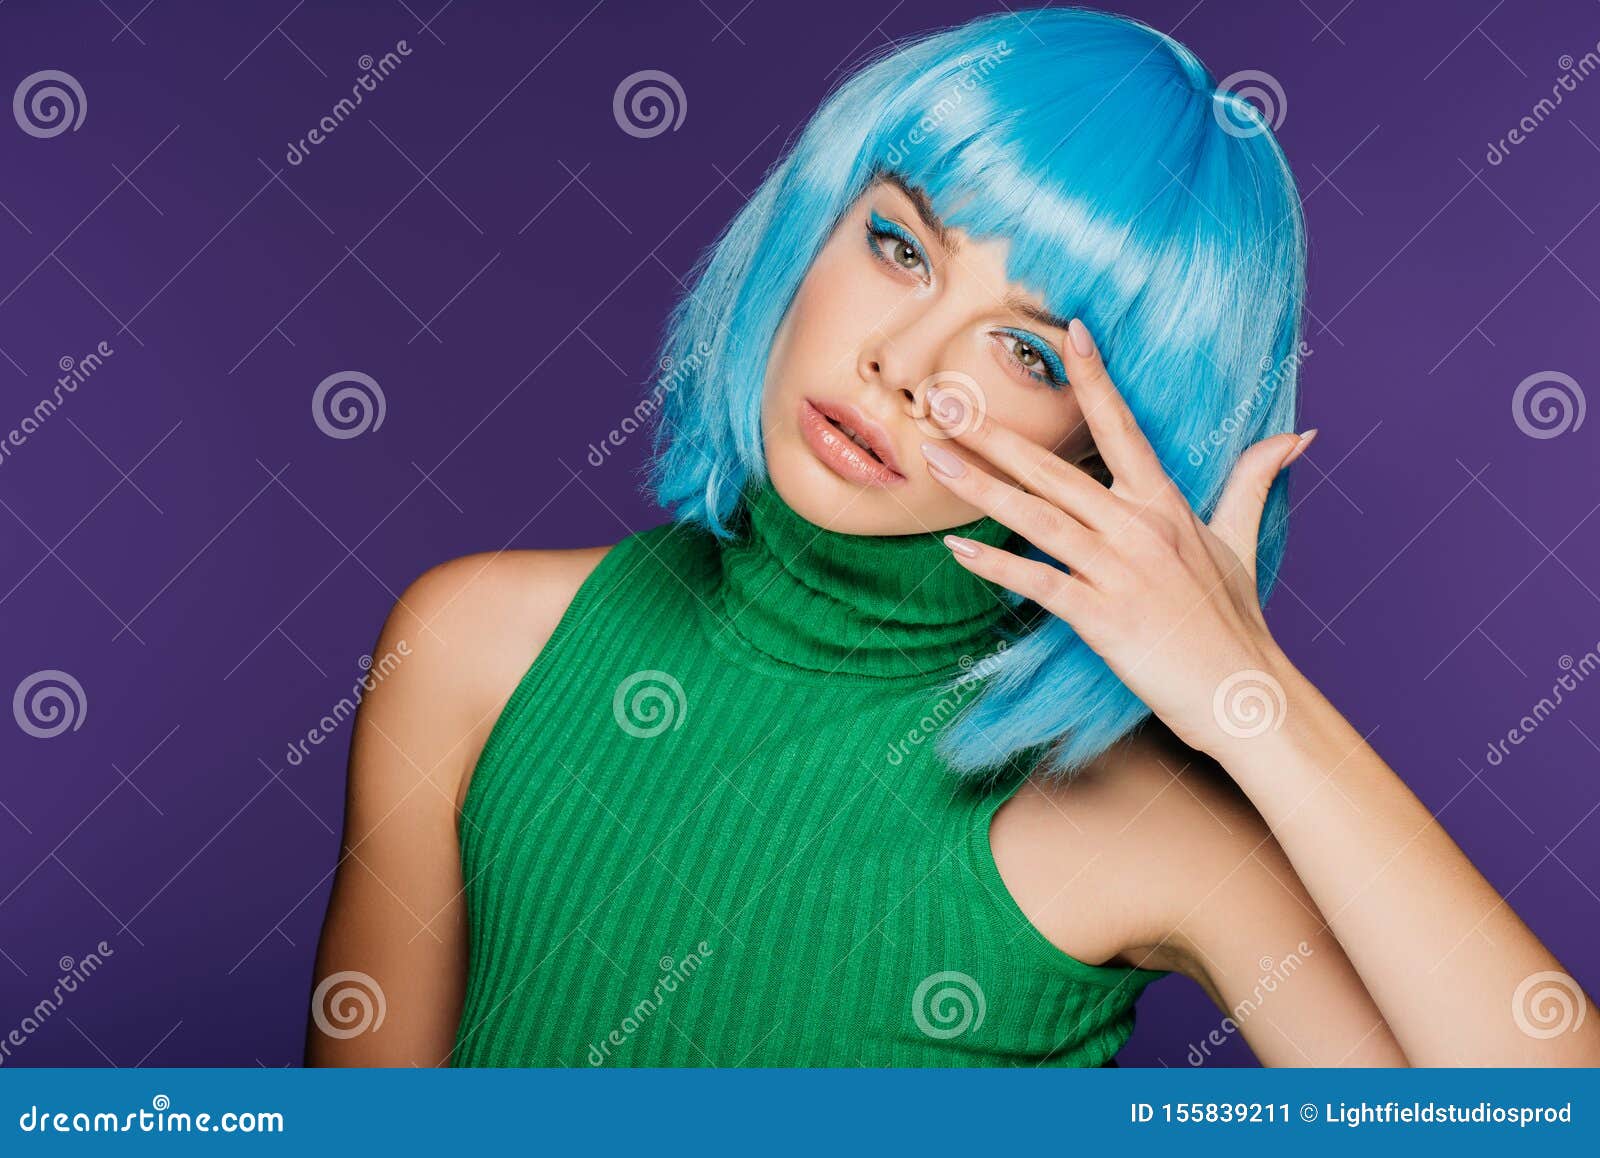 2. "Cute girl with blue hair sketch" - wide 7